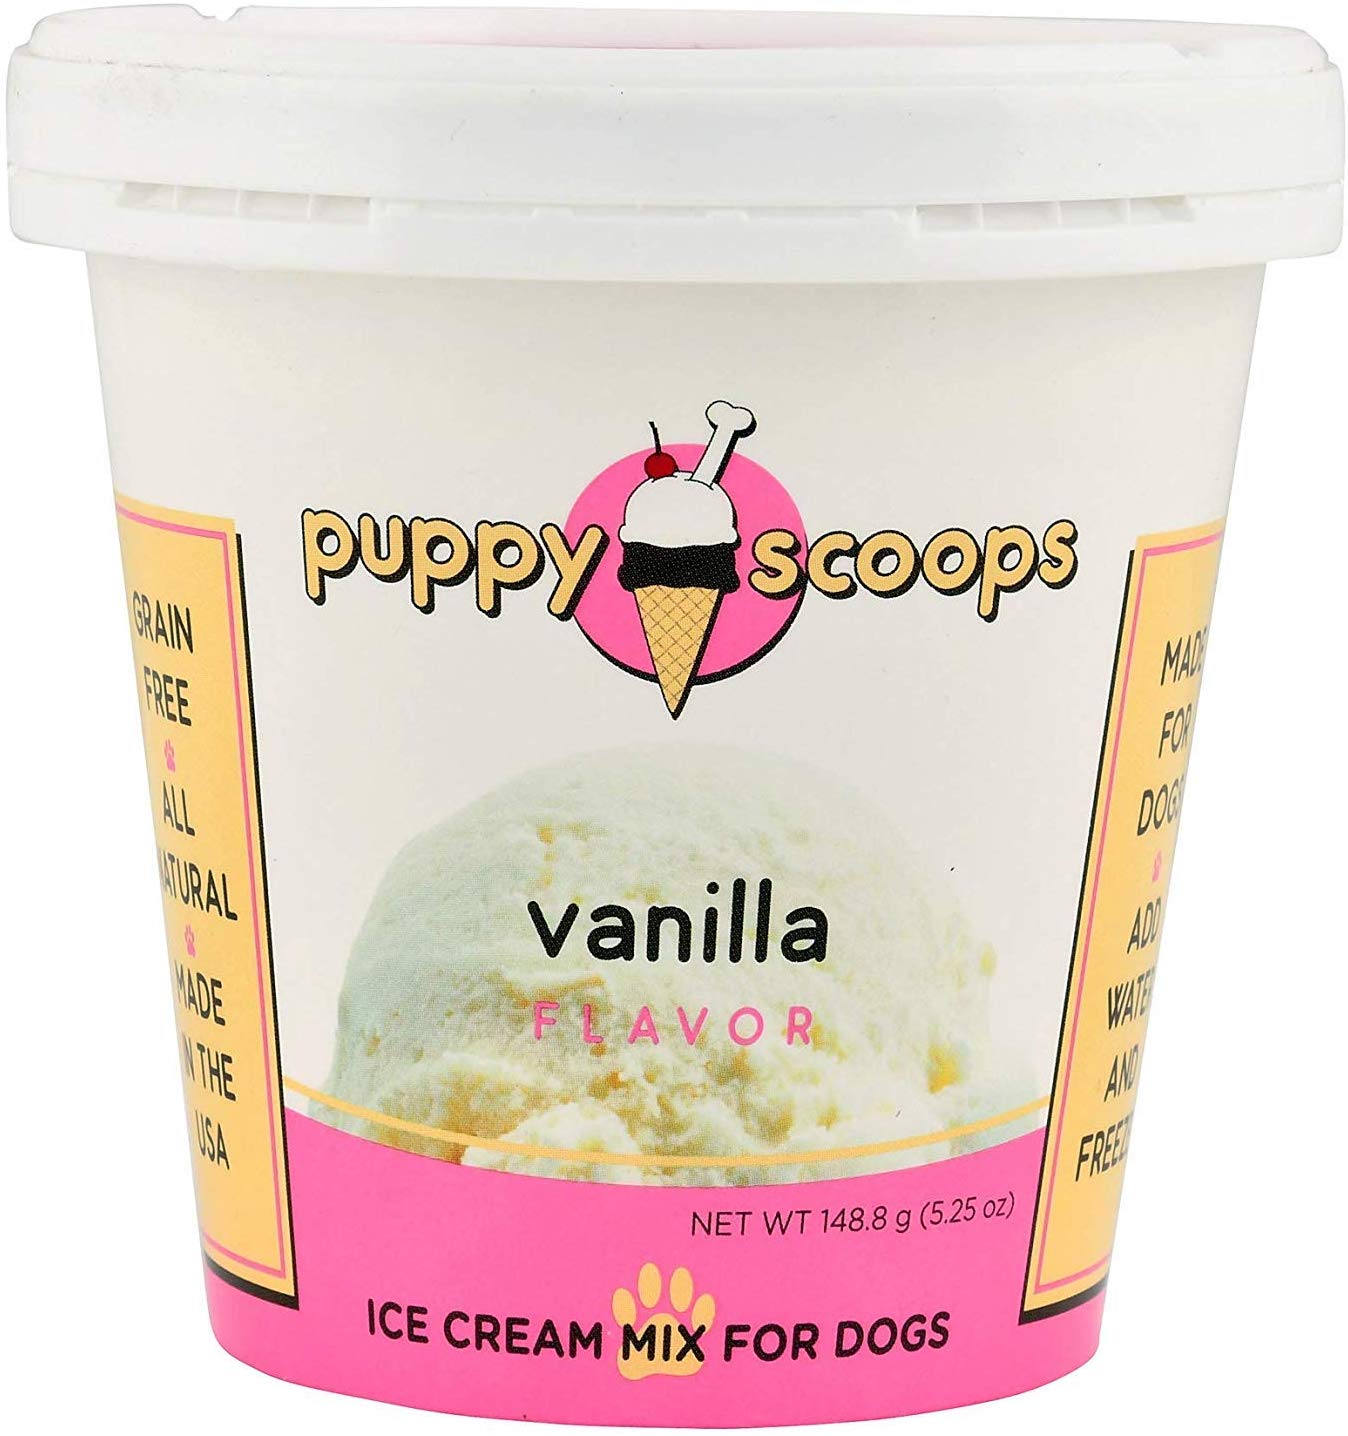 Puppy Scoops Ice Cream Mix for Dogs: Vanilla - Add water and freeze at home!